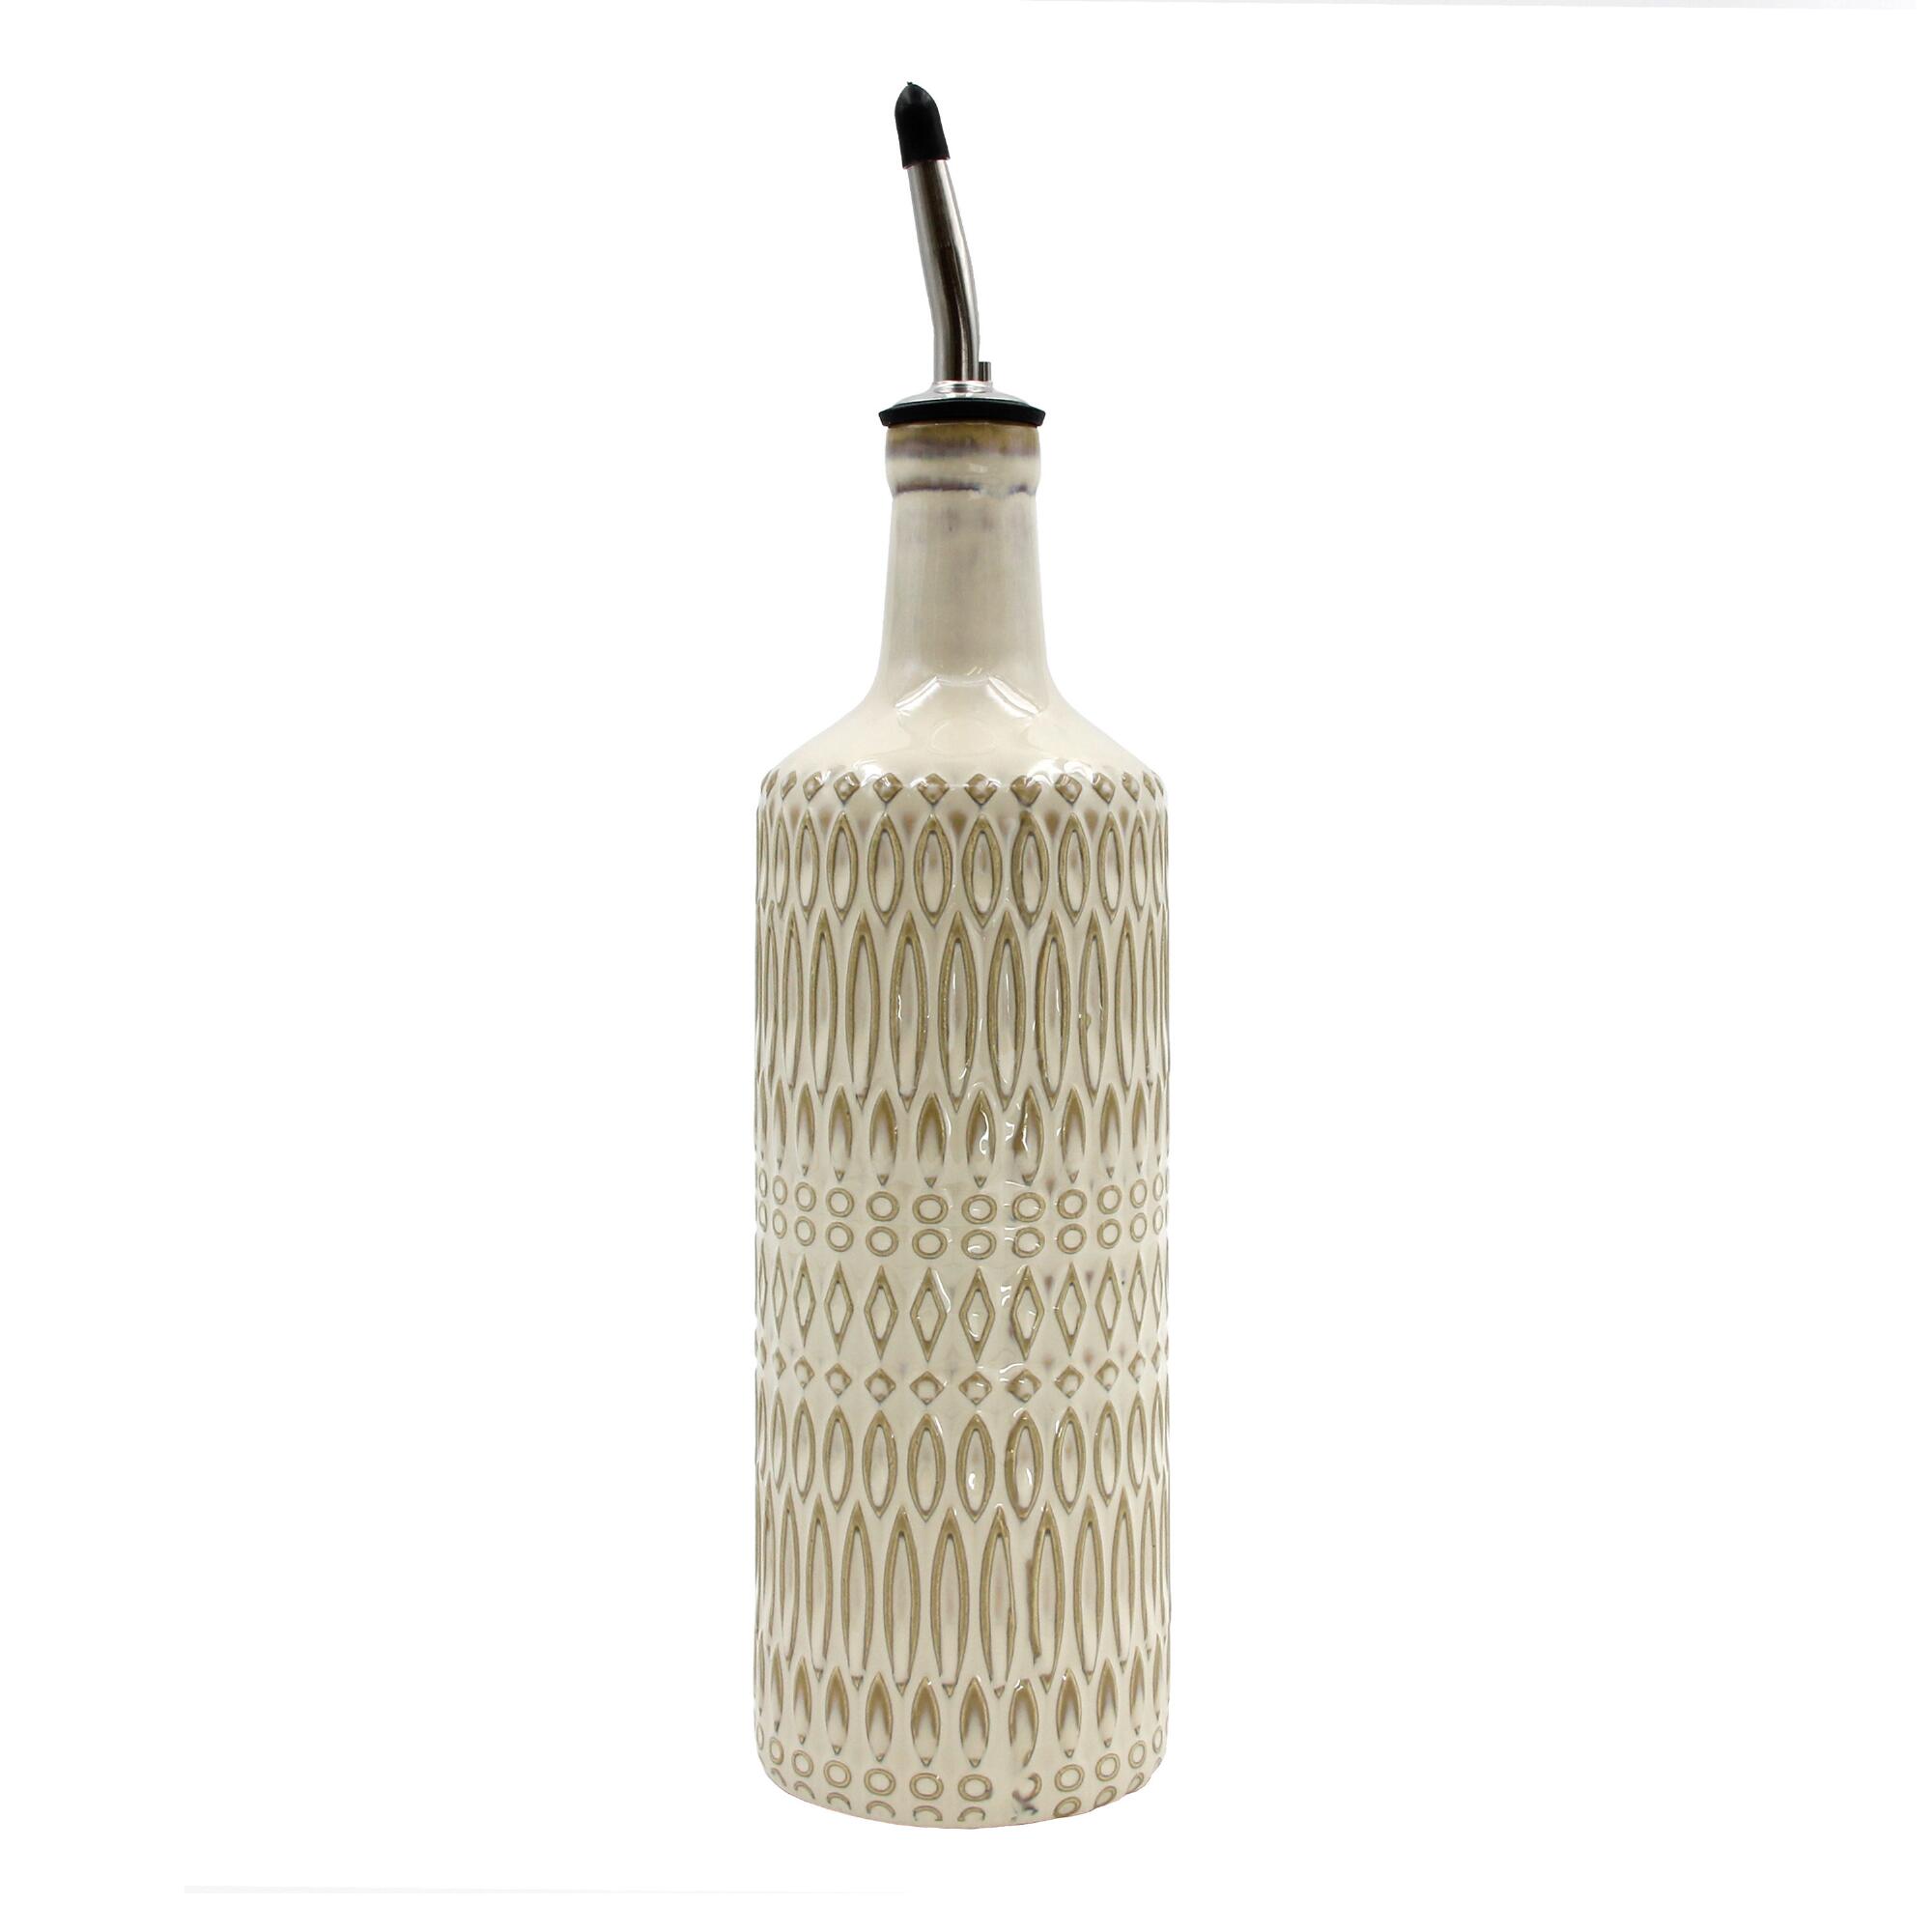 Natural Textured Ceramic Oil Bottle with Spout: White by World Market